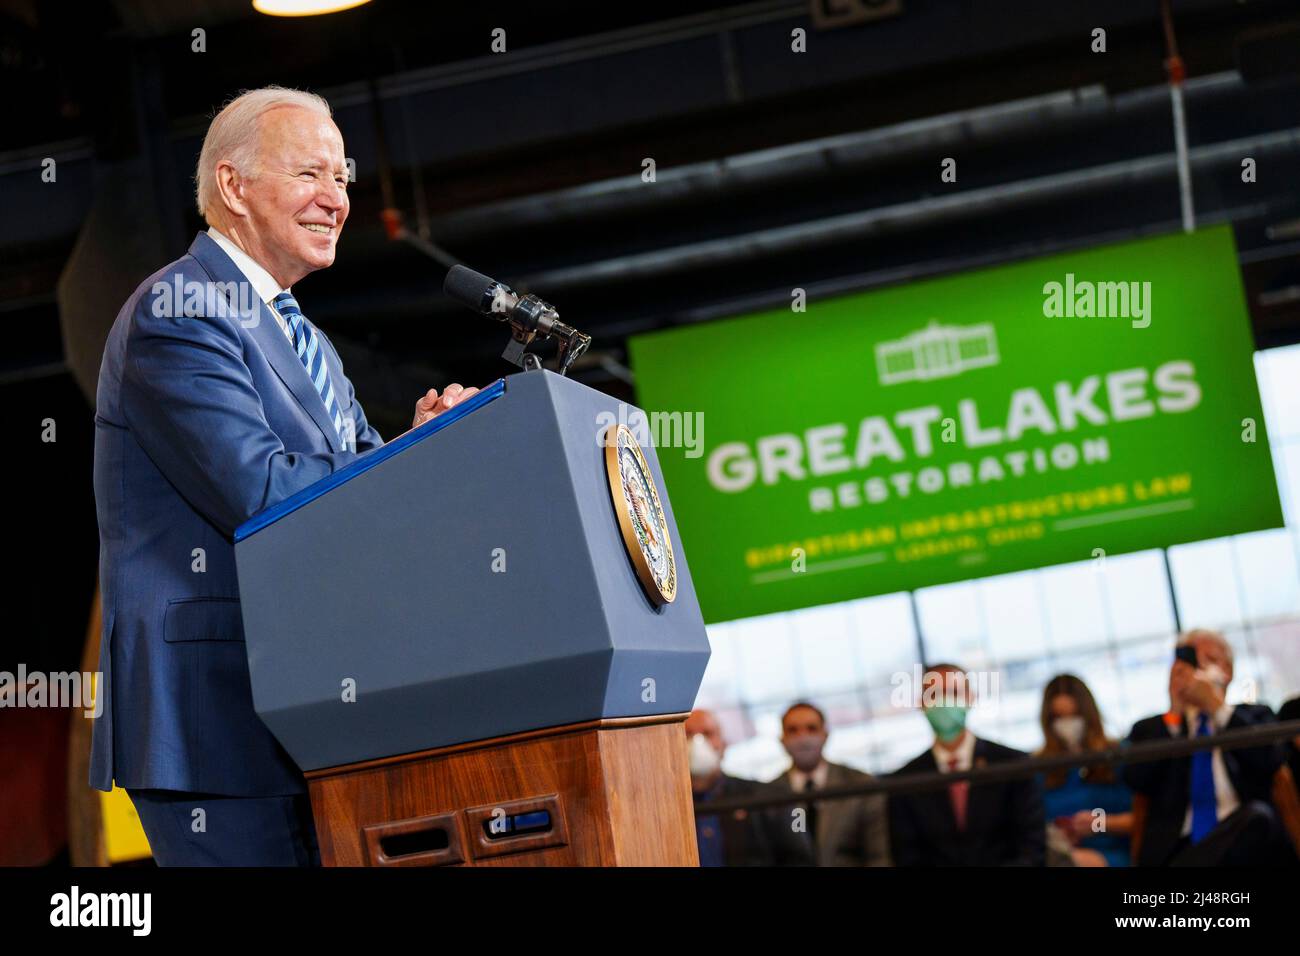 LORAIN, OHIO, USA - 17 February 2022 - US President Joe Biden delivers remarks on Great Lakes restoration and the Bipartisan Infrastructure Law, Thurs Stock Photo